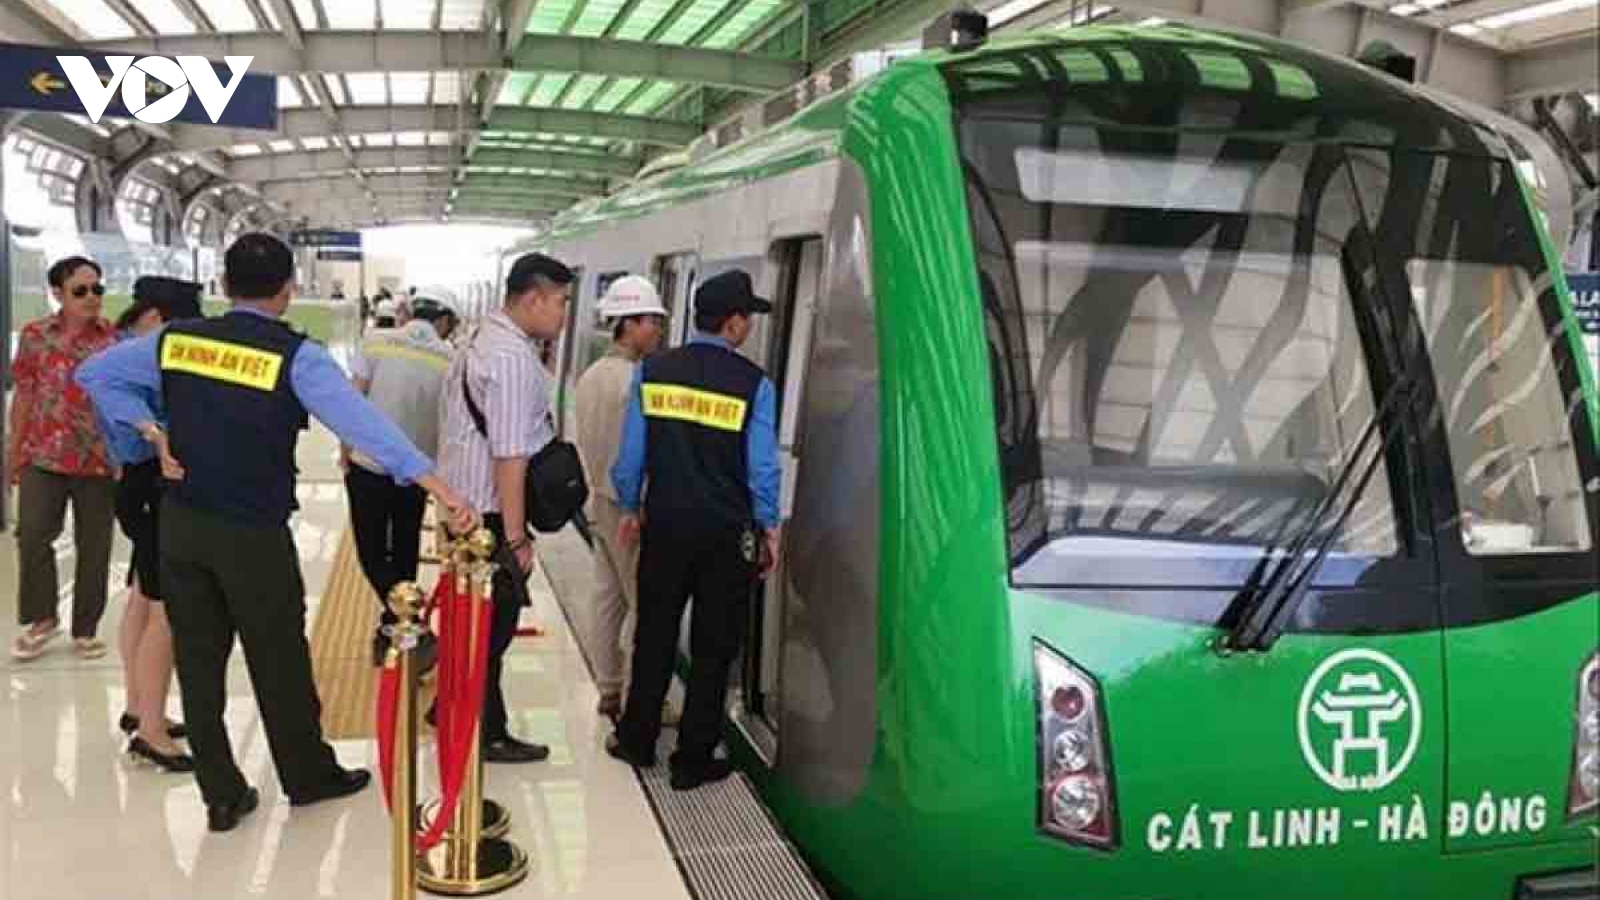 Hanoi metro line inaugurated after 10 years of construction